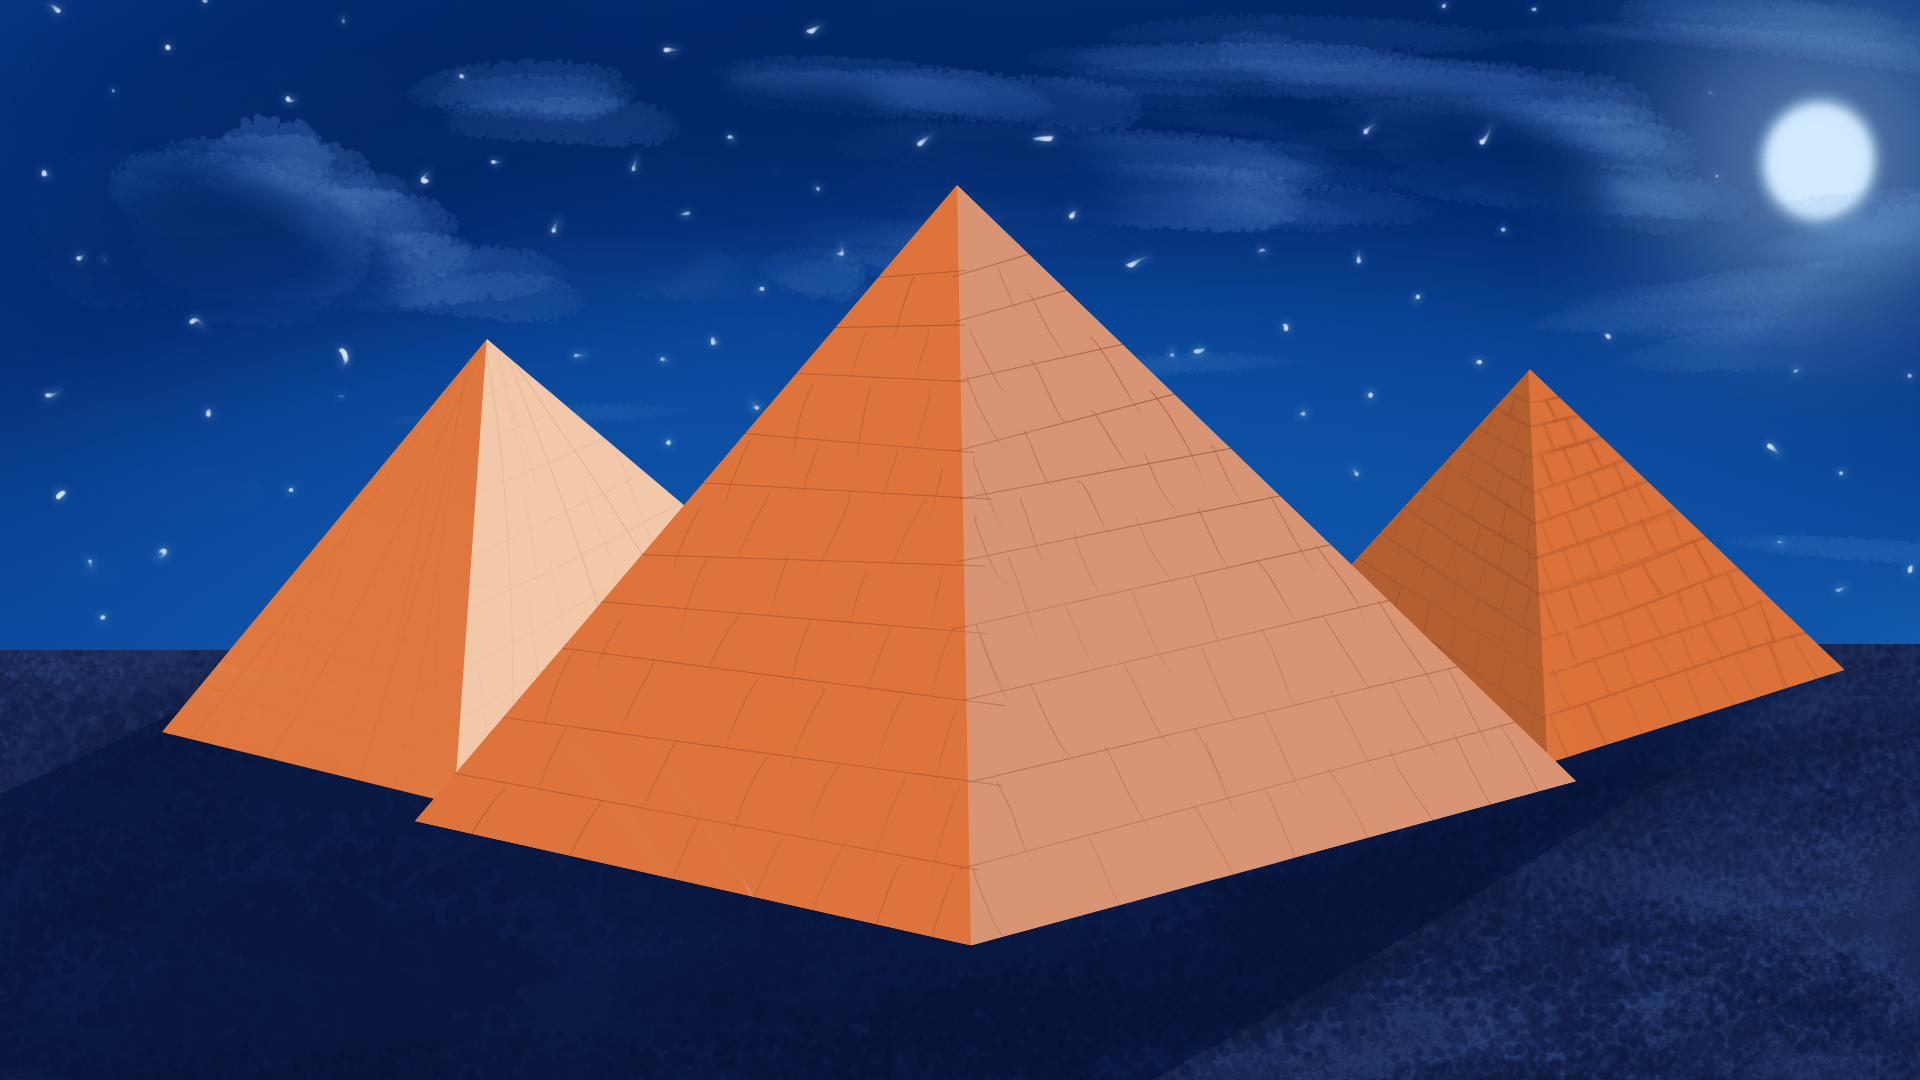 Pyramid Perspective Night Sky Clouds Moon 1920x1080